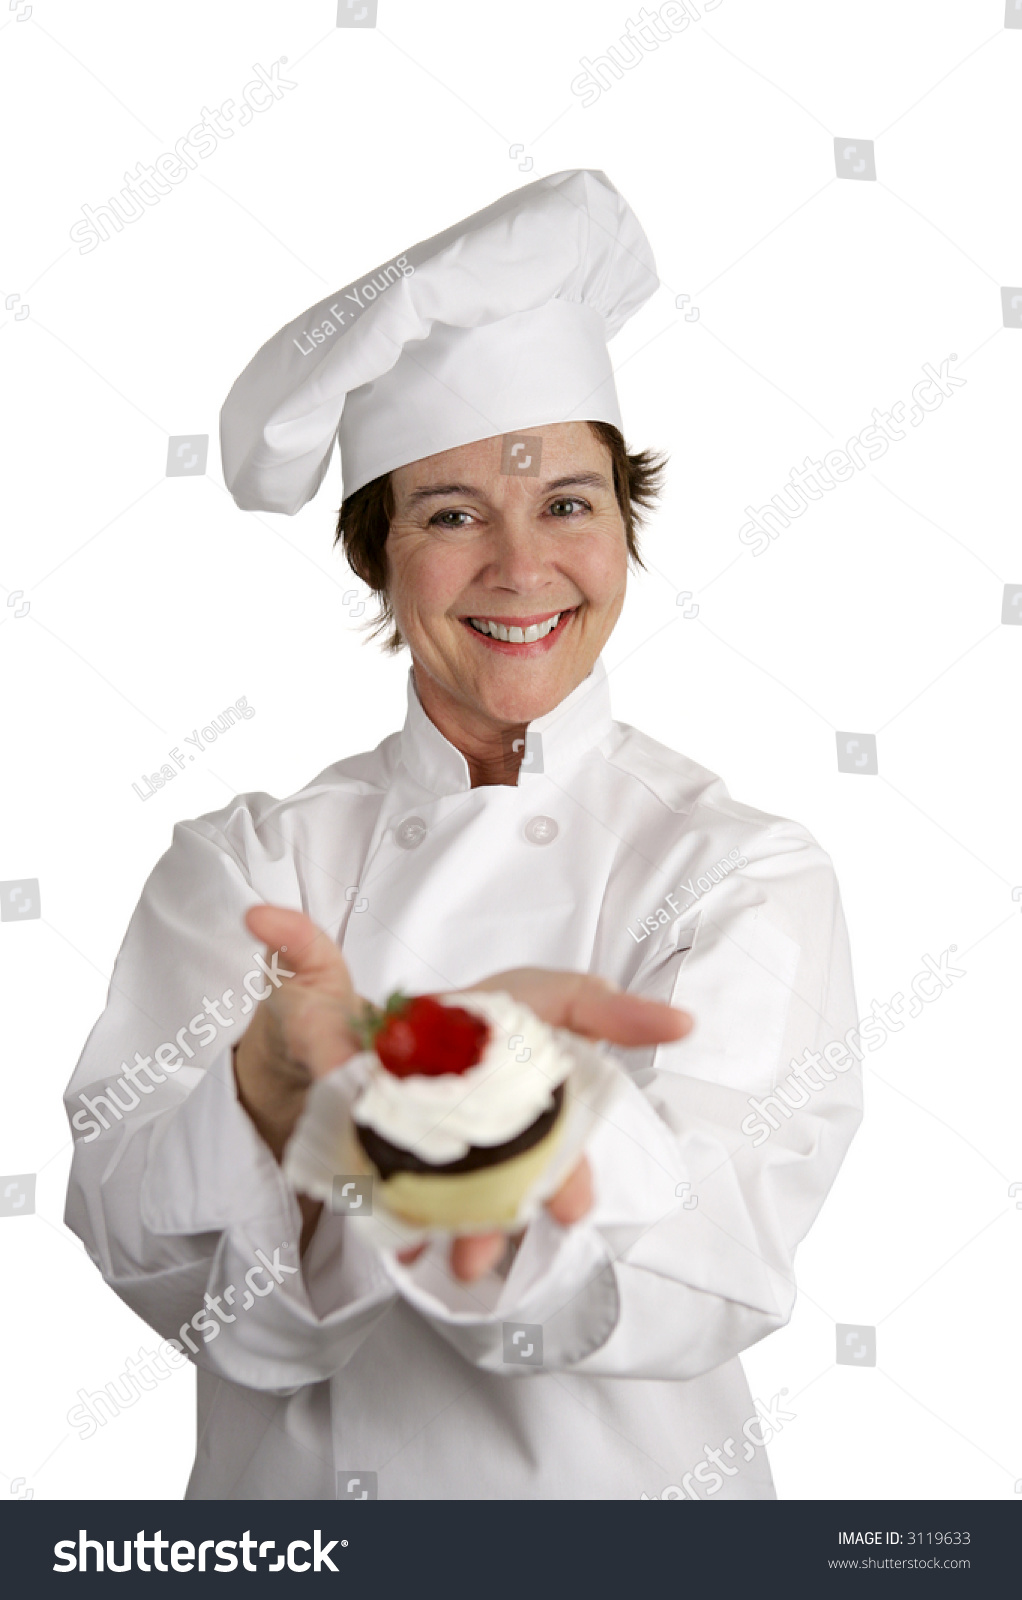 A Friendly Happy Looking Pastry Chef Holding A Dessert She Just Made ...